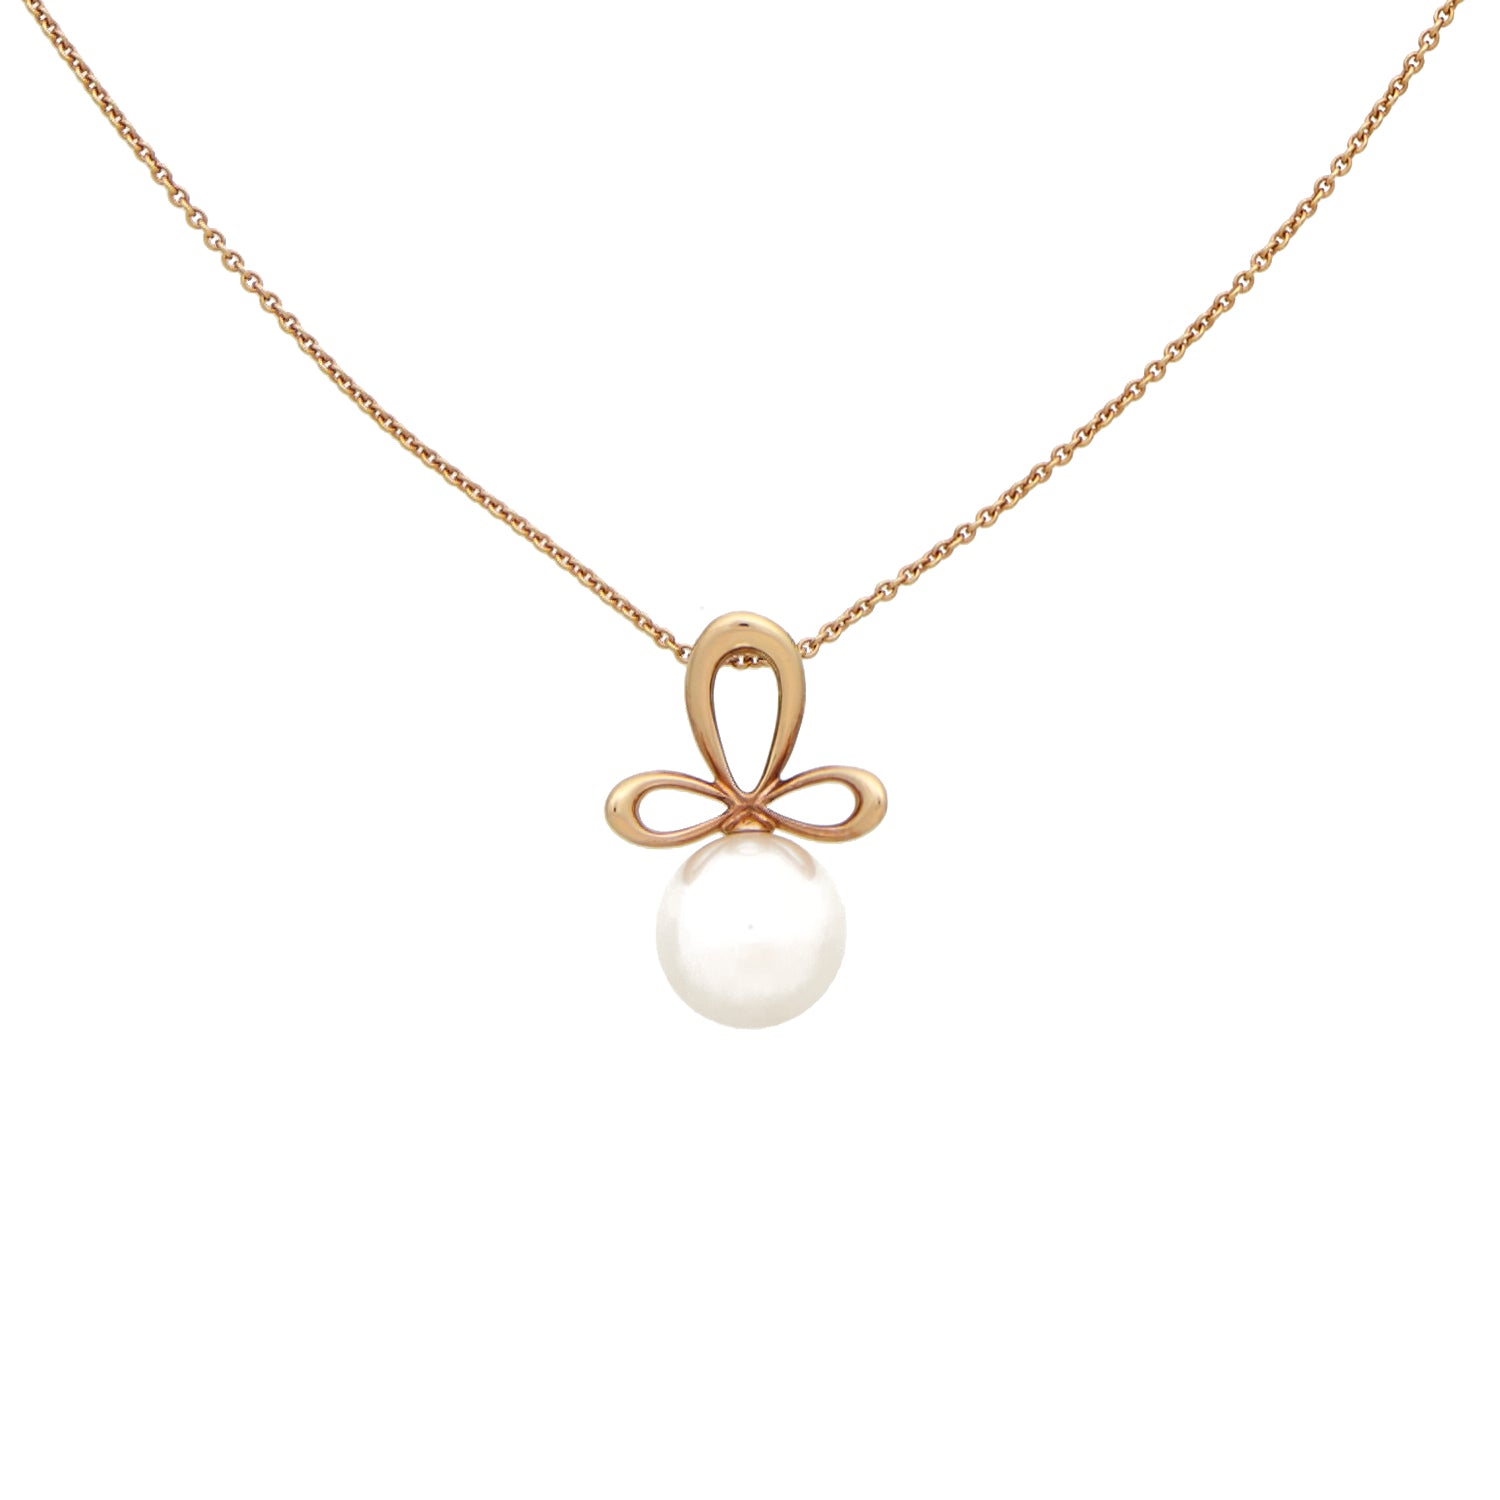 Rose gold necklace with pearl